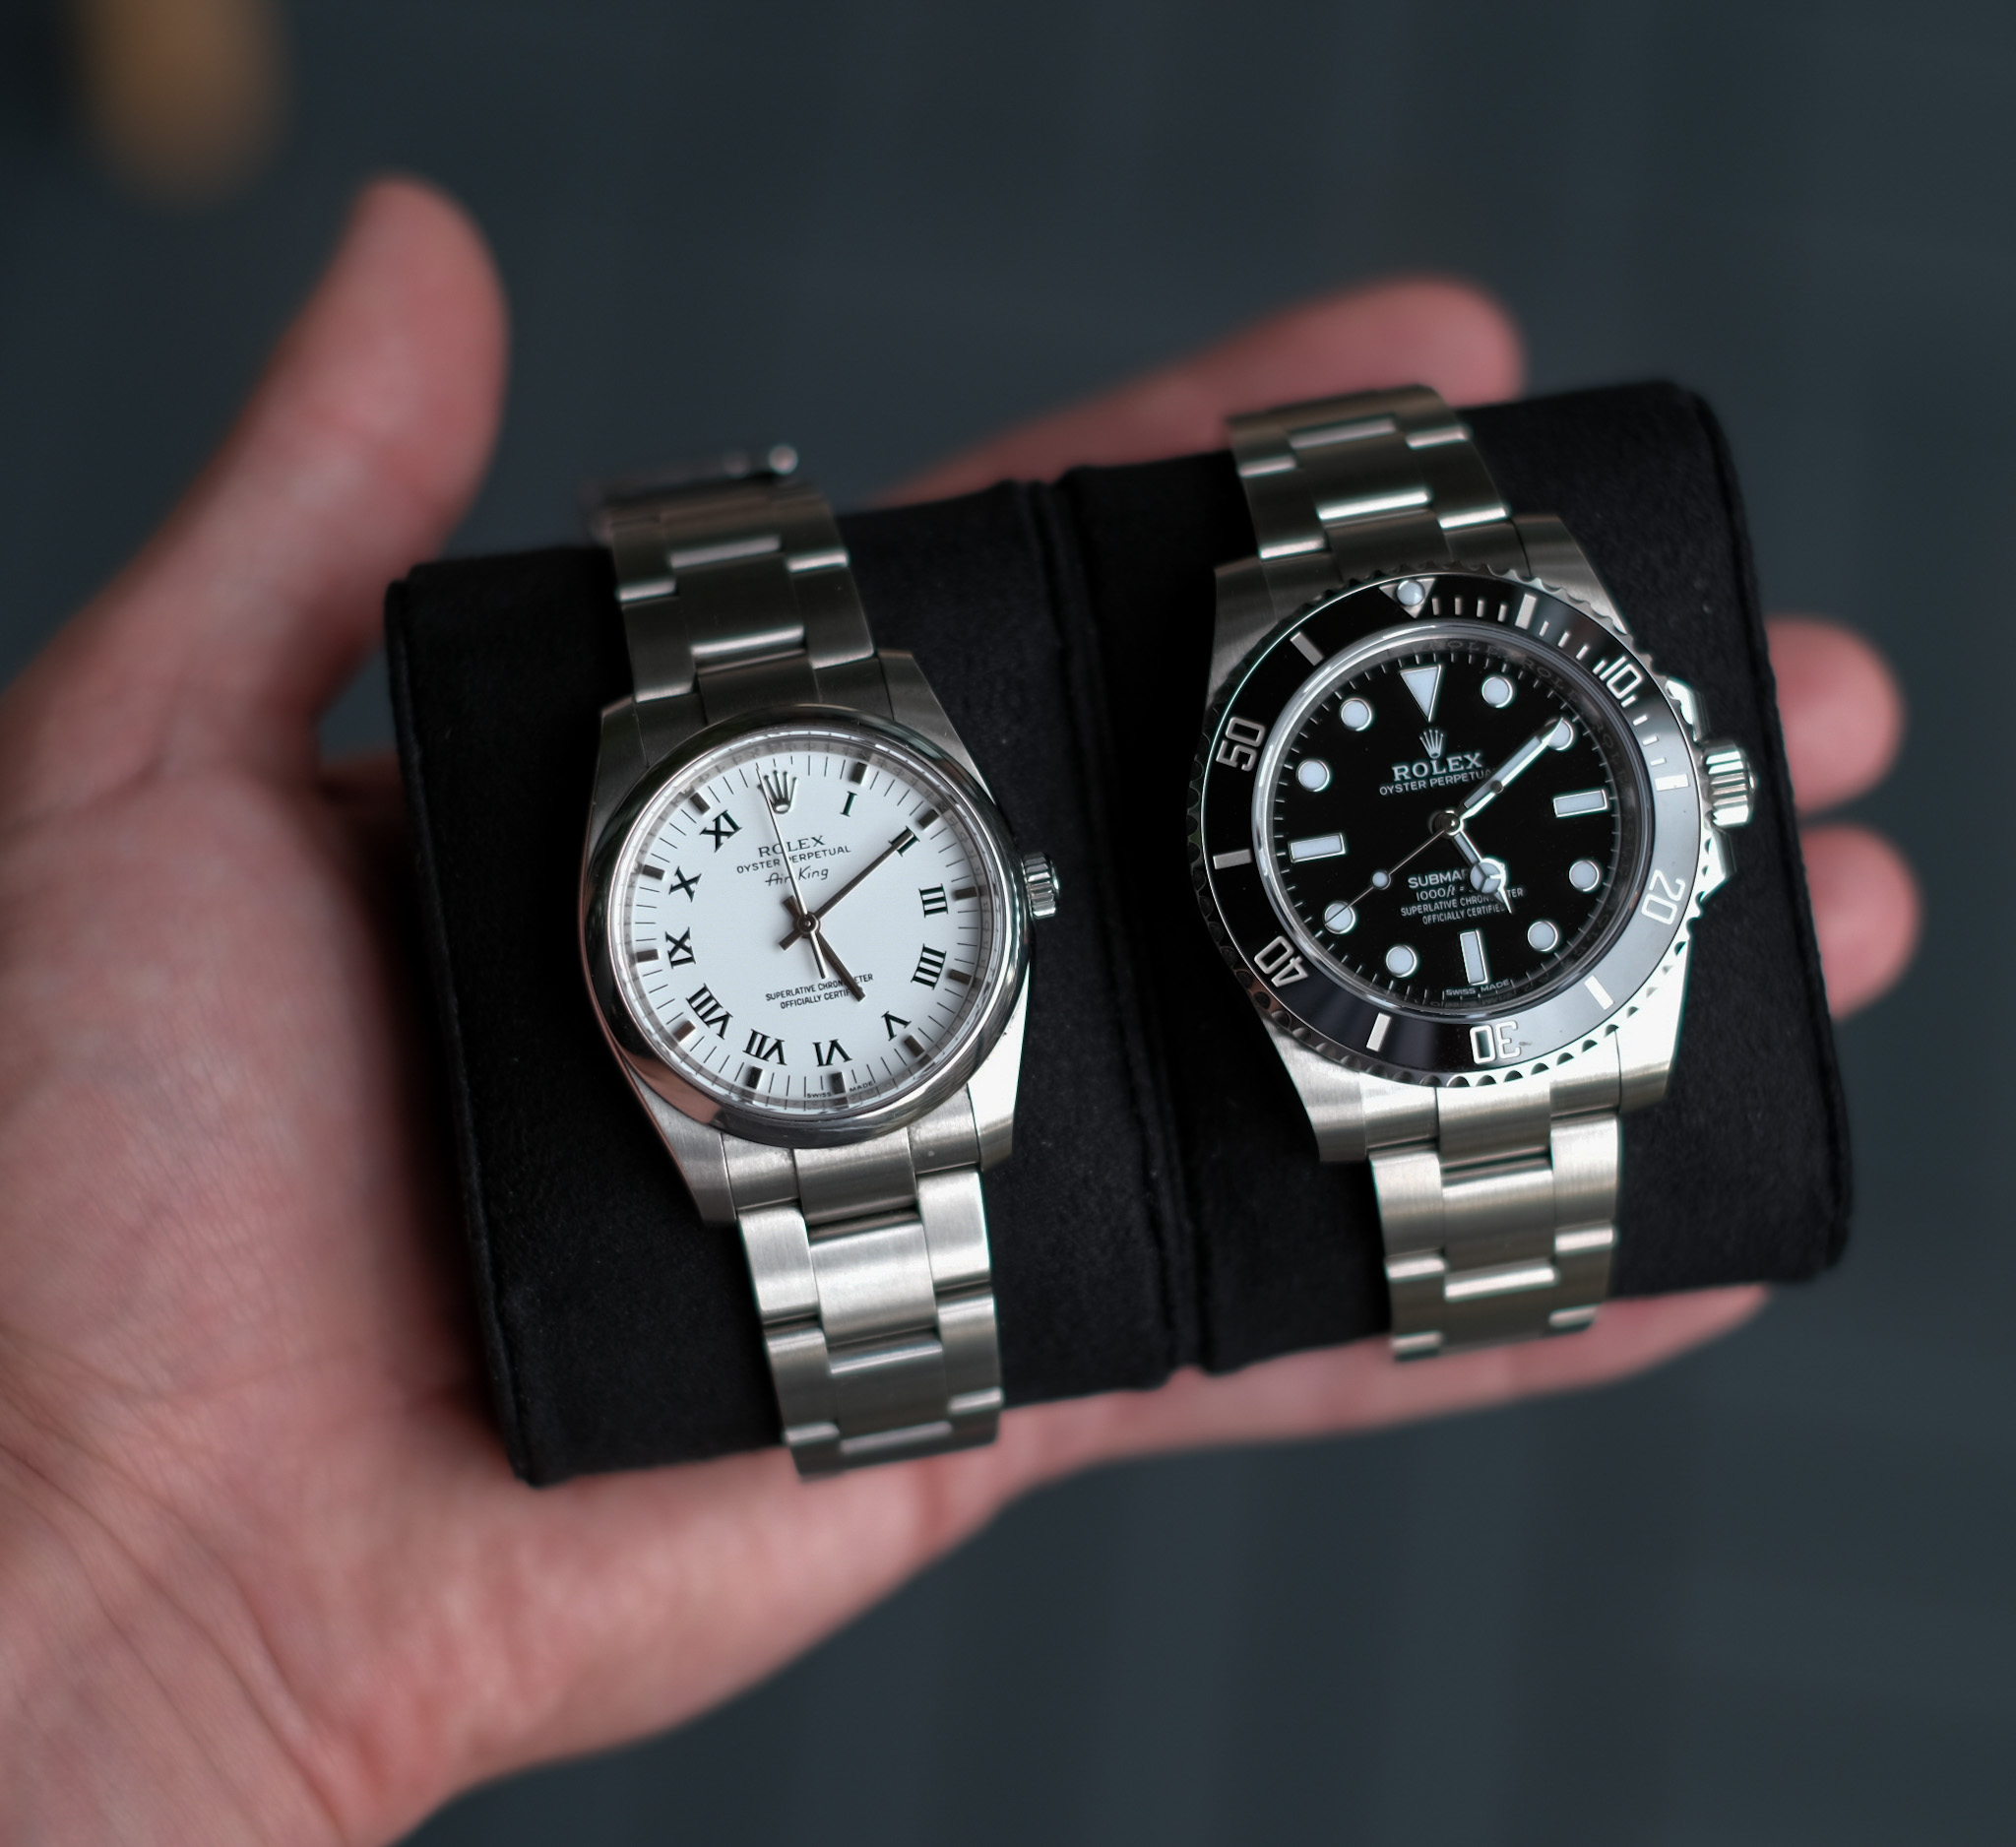 Envisioning the future of your Rolex collection